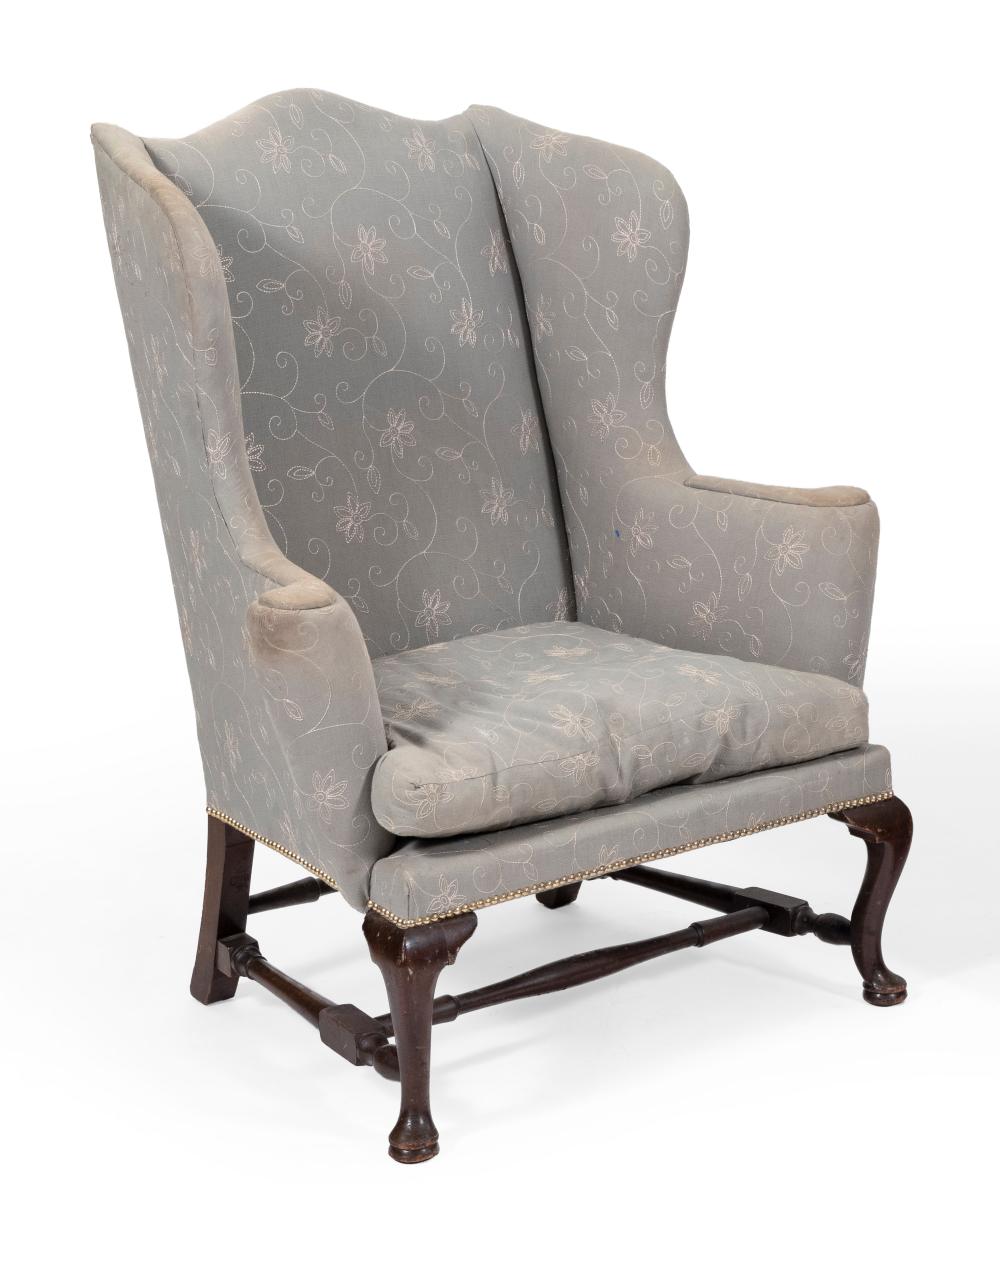 QUEEN ANNE-STYLE WING CHAIR MAHOGANY